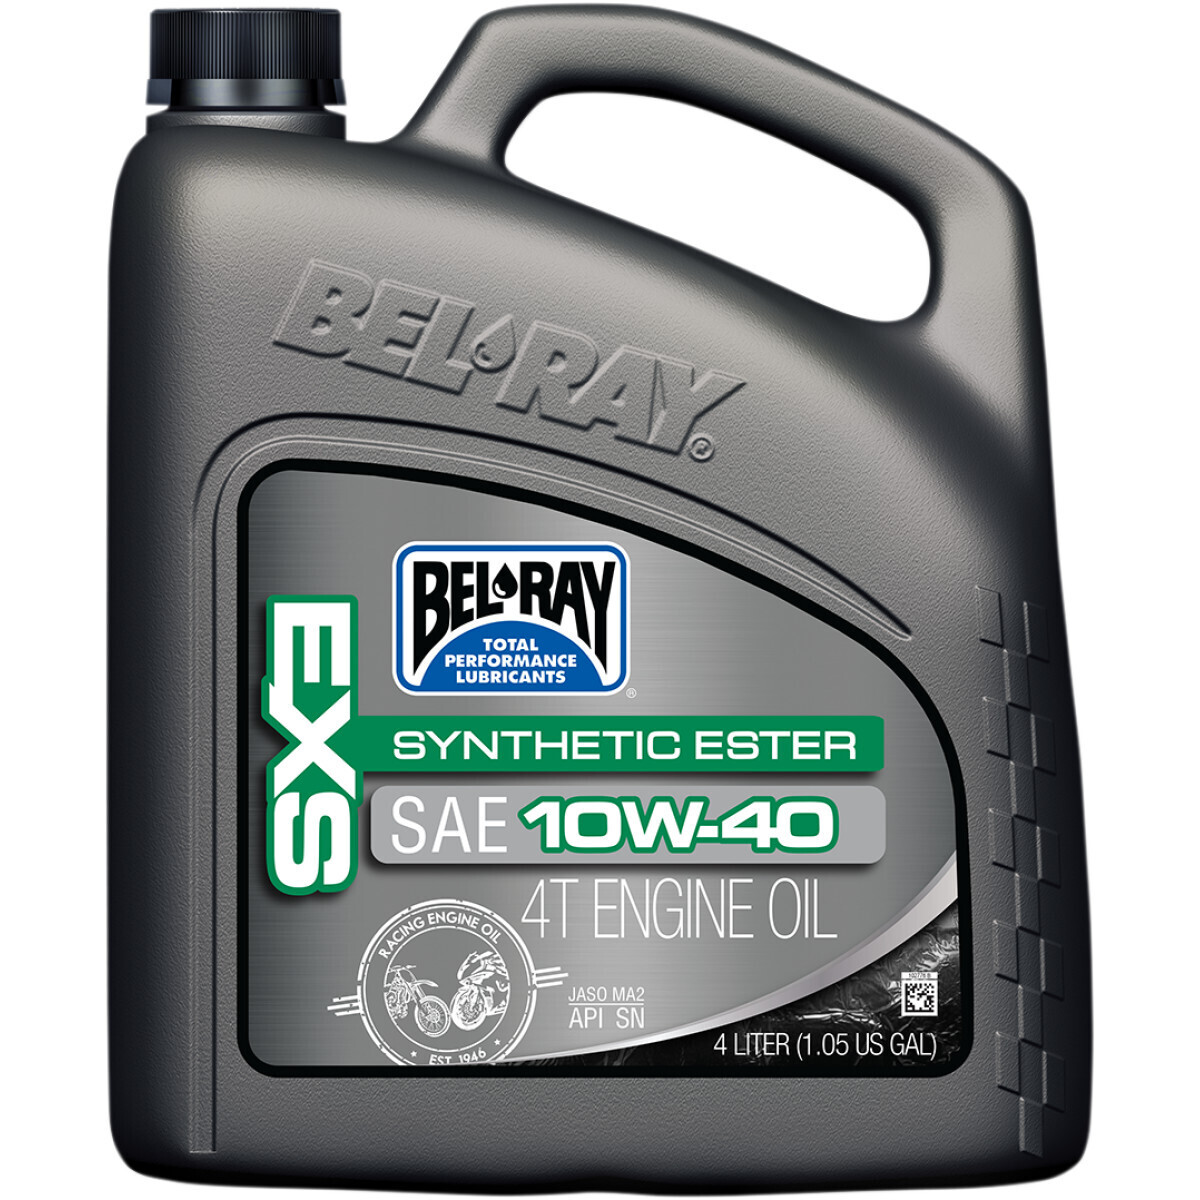 BEL-RAY
EXS SYNTHETIC ESTER 4-STROKE ENGINE OIL 10W-40 4 LITER